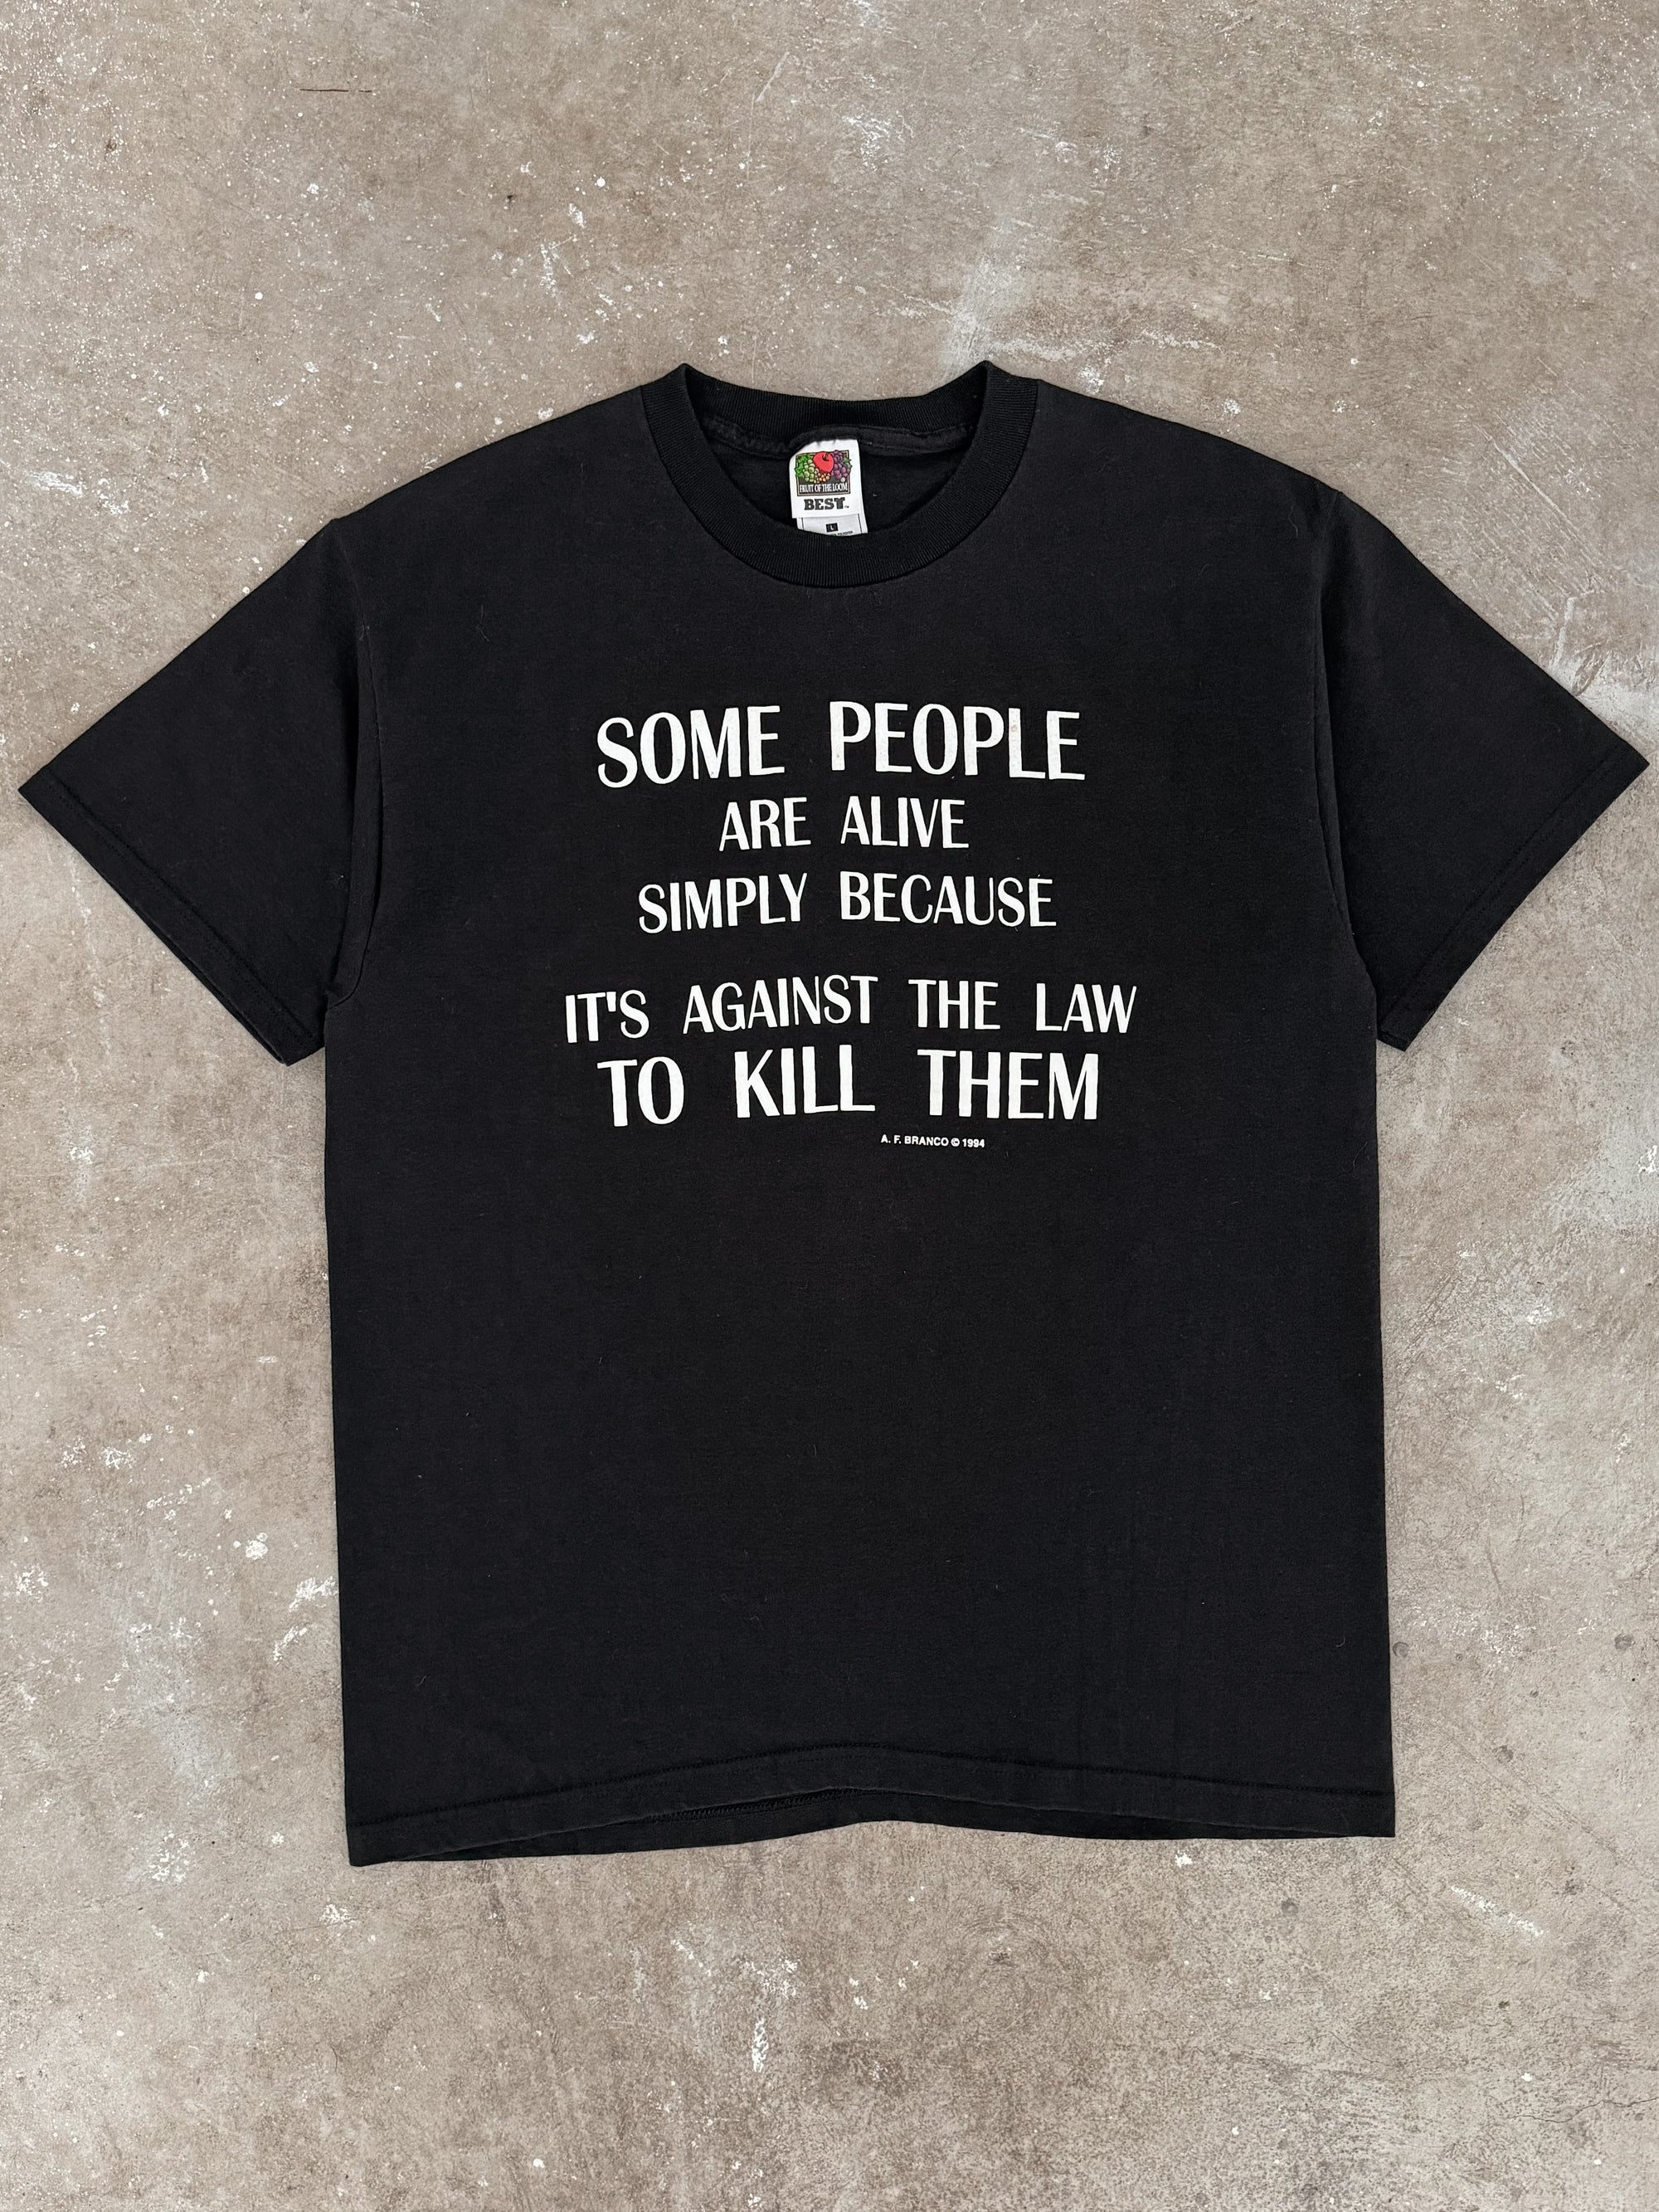 1990s "Some People Are Alive..." Tee (M/L)